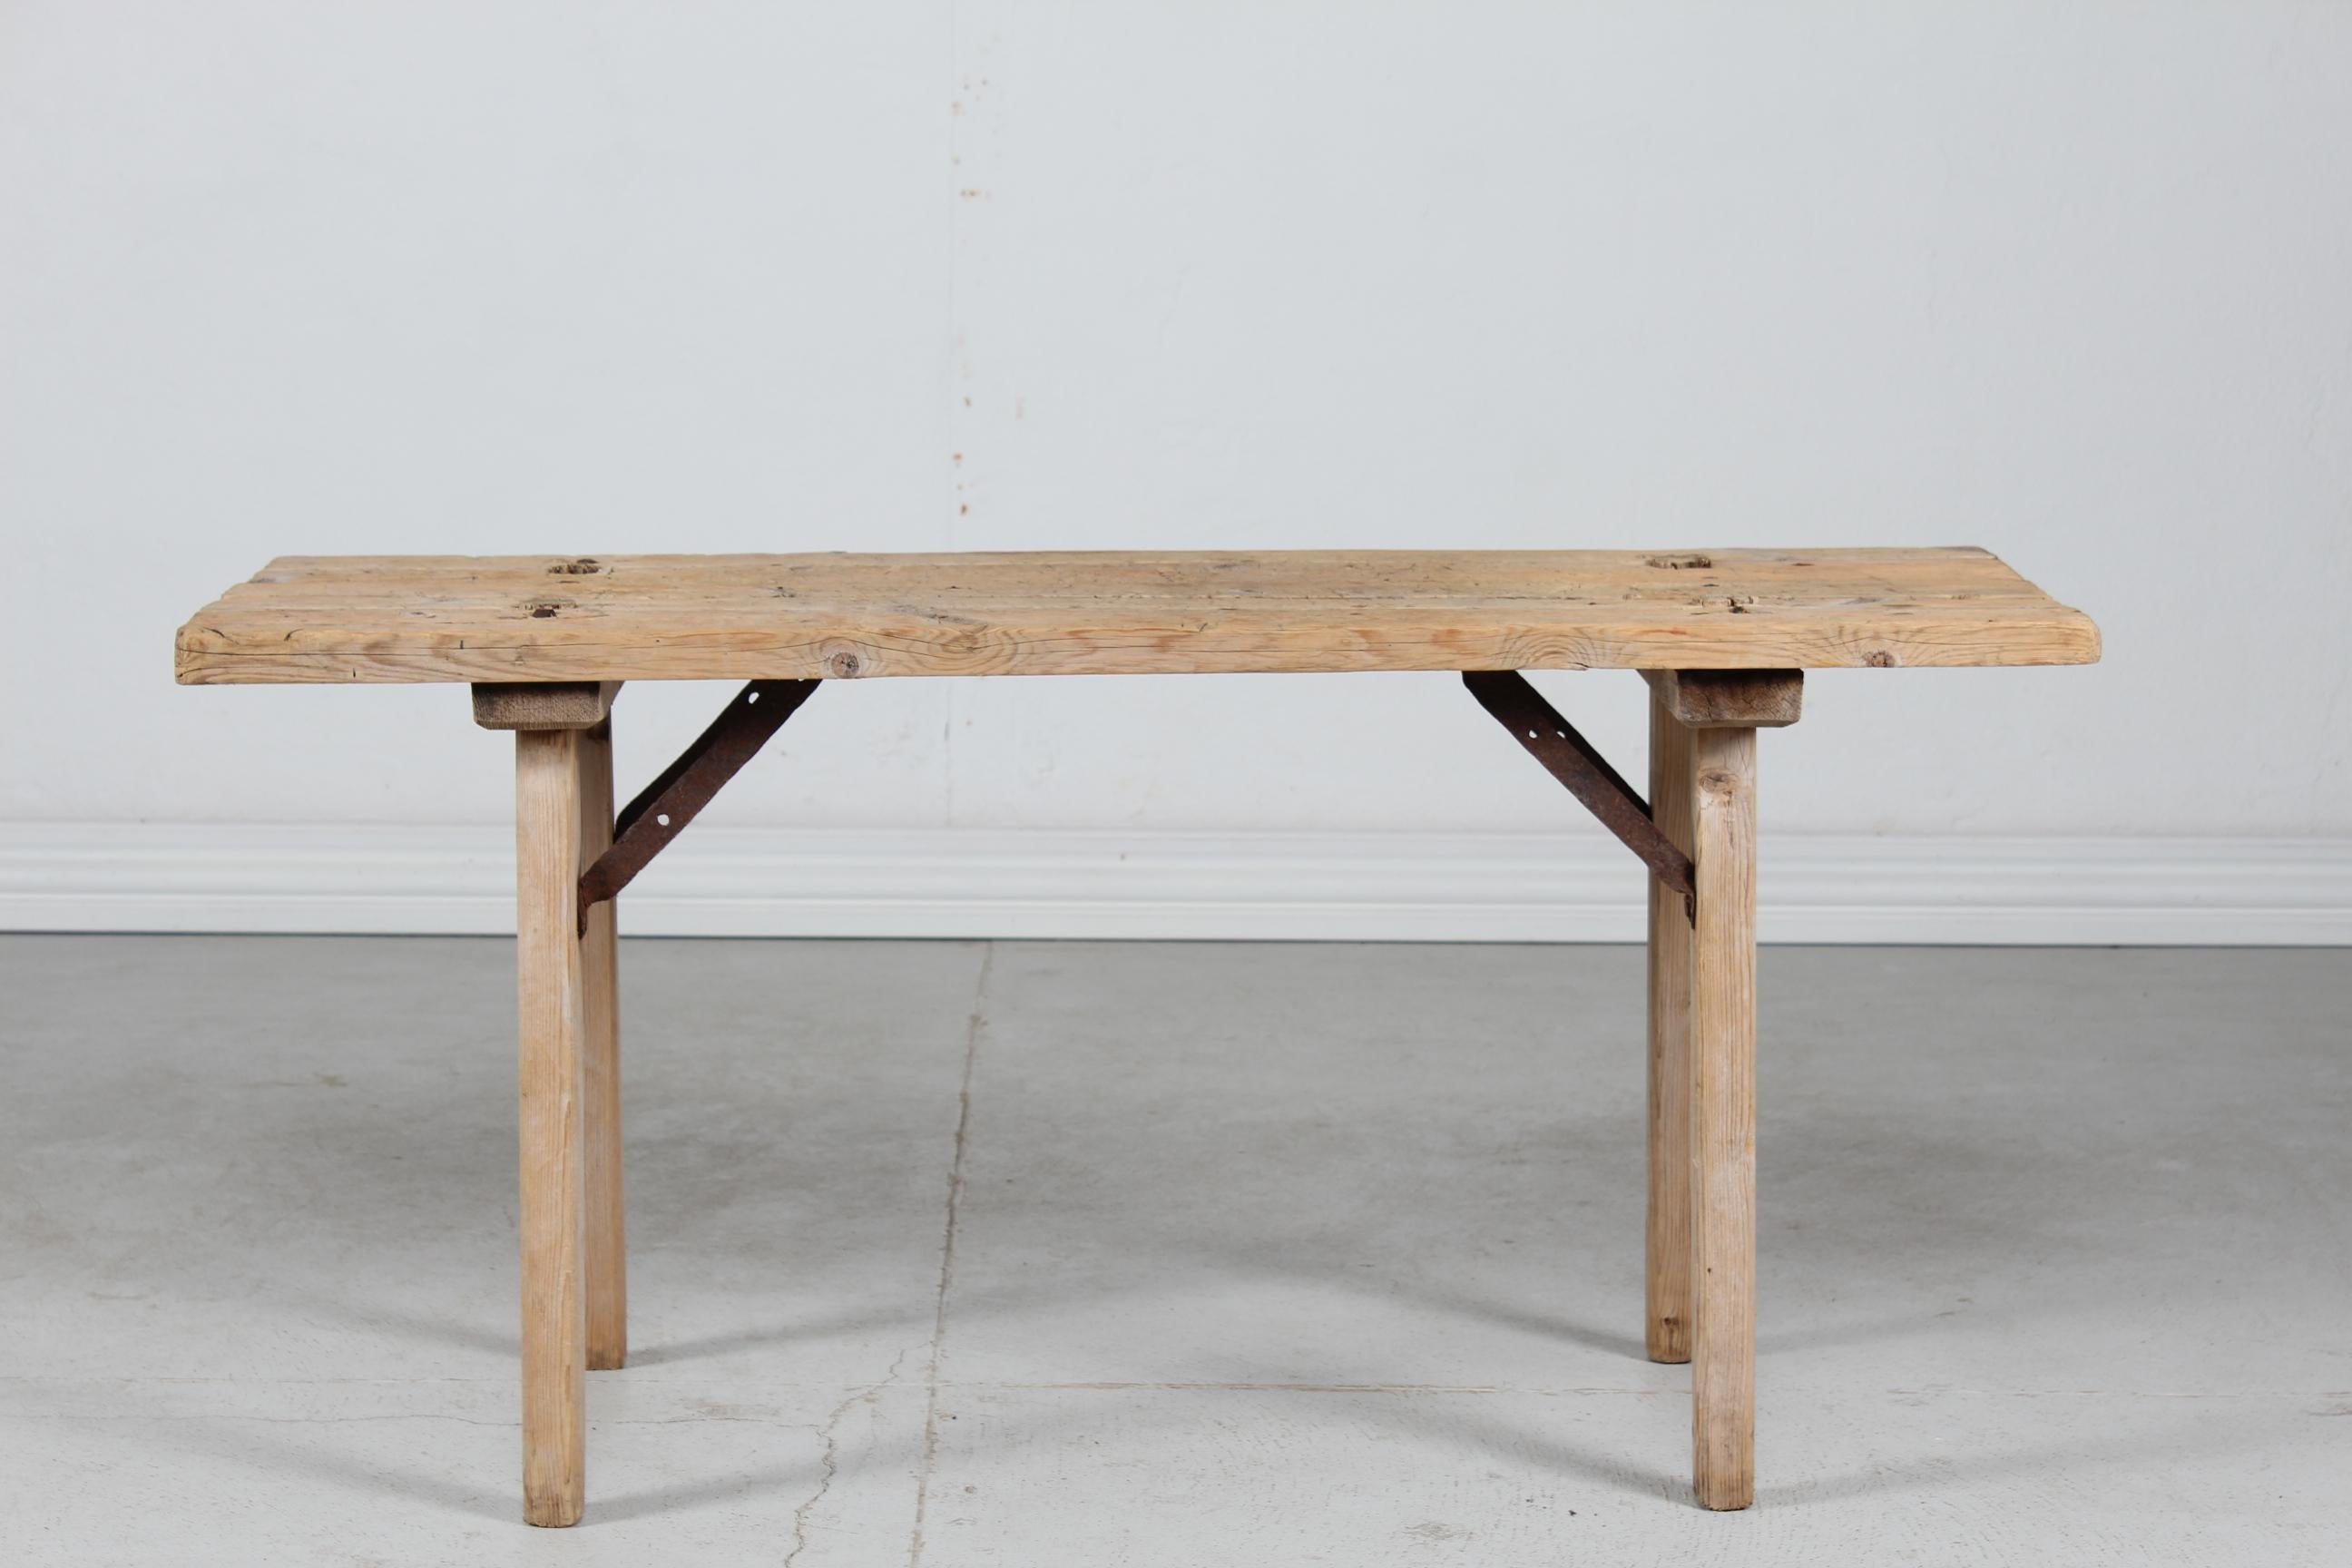 Rustic Wabi Sabi bench made of solid washed and patinated pine wood.
It's made in the early 20th century by a Scandinavia carpenter.

Measures: height 57-58 cm
Length 120 cm
Width 46 cm

The bench is in good condition with fantastic signs of